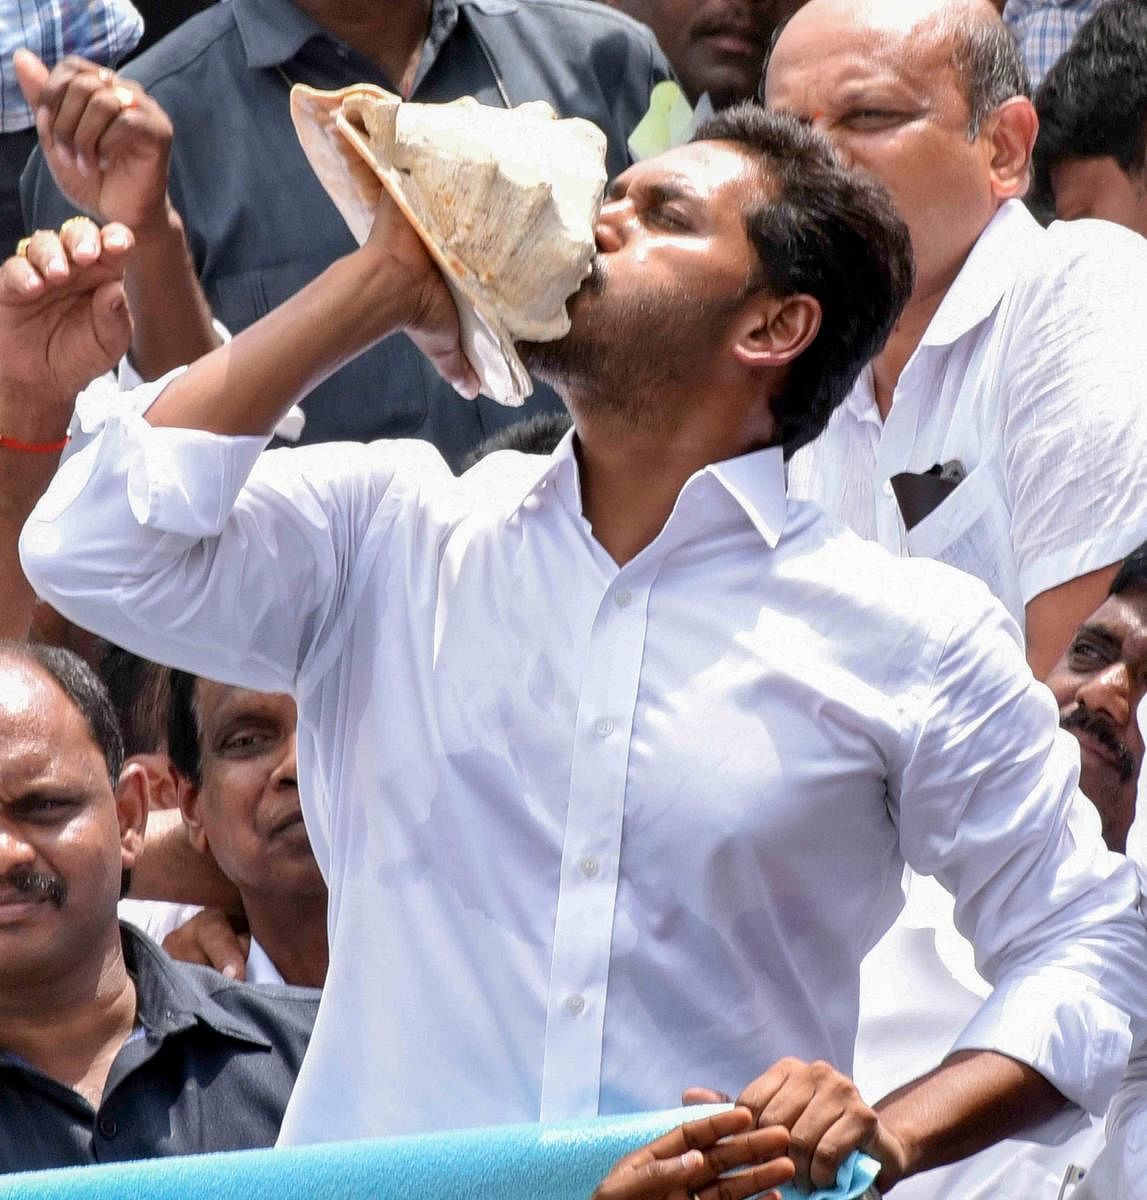 YSR Congress Party chief Jaganmohan Reddy during a public rally at Polavaram in West Godavari district of Andhra Pradesh, Tuesday, March 19, 2019. (PTI Photo)